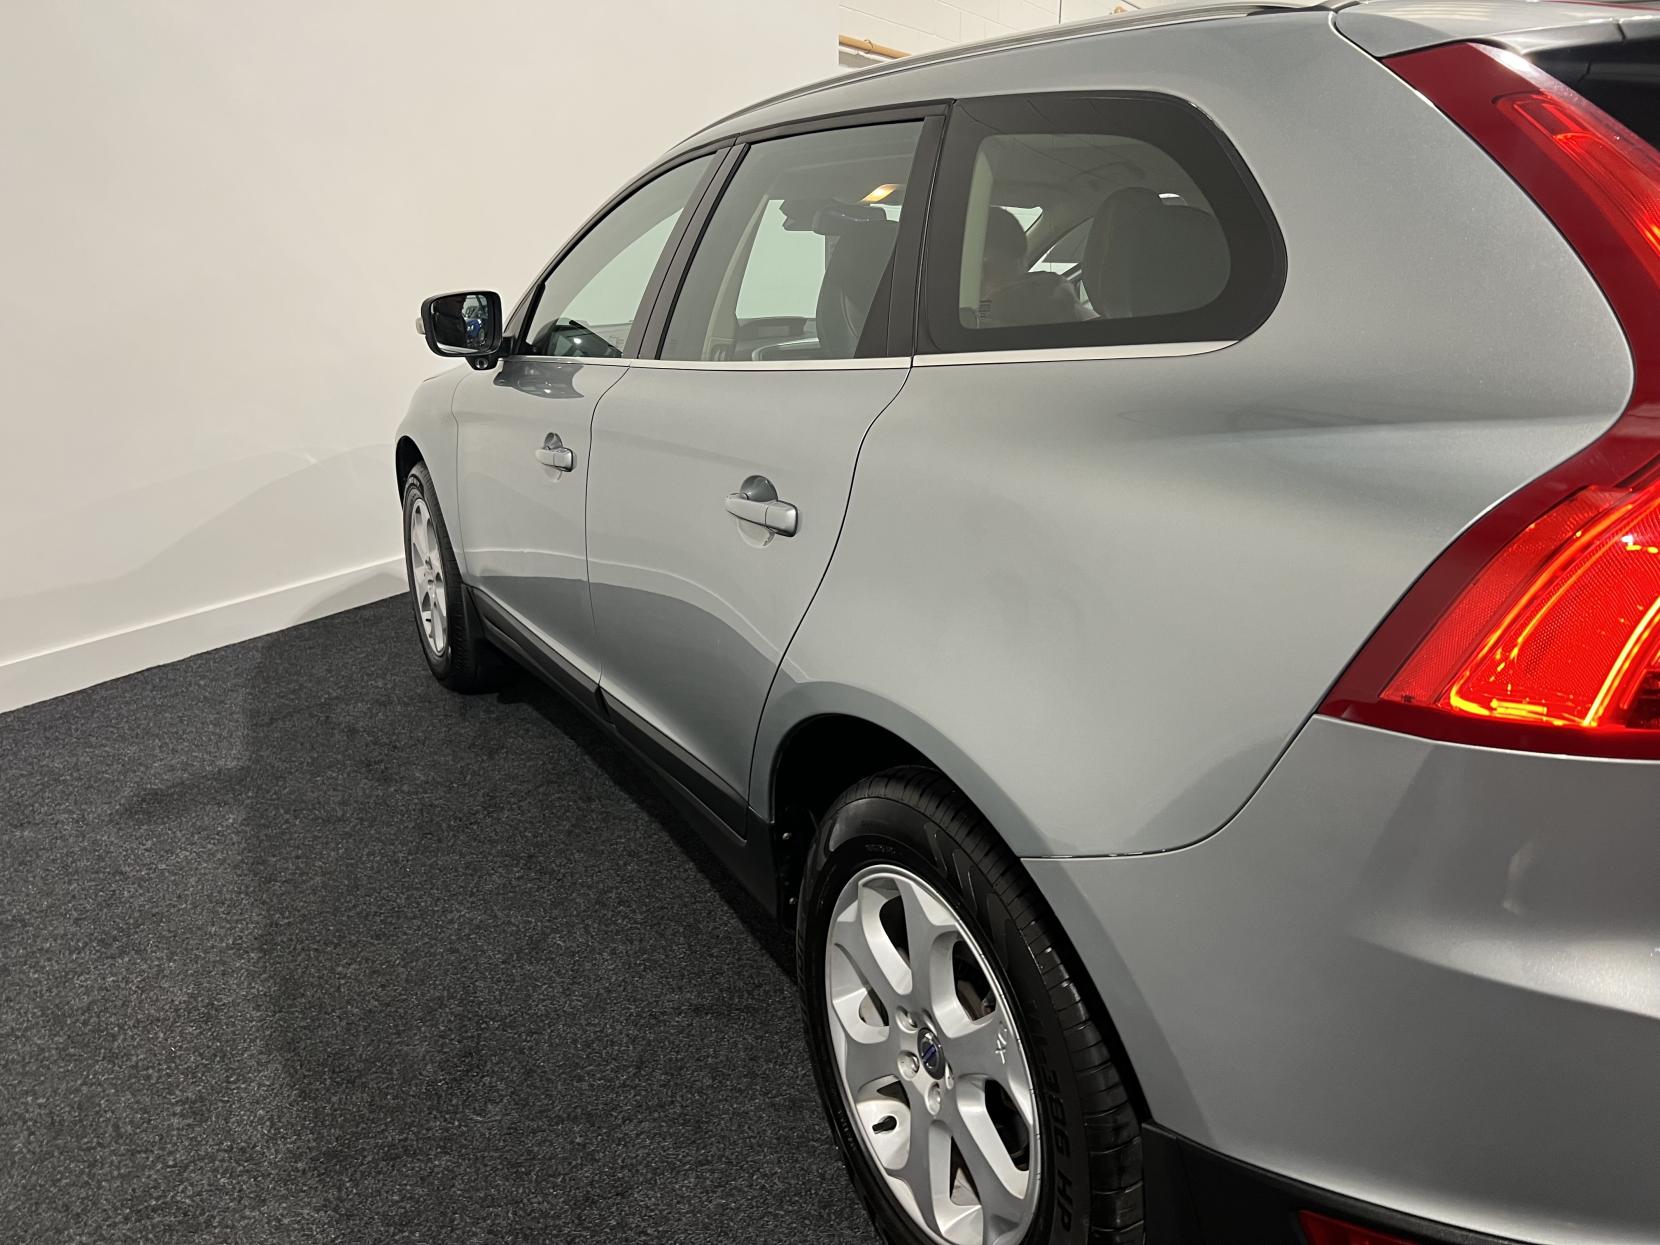 Volvo XC60 2.4 D5 SE Lux SUV 5dr Diesel Manual AWD Euro 4 (205 ps)